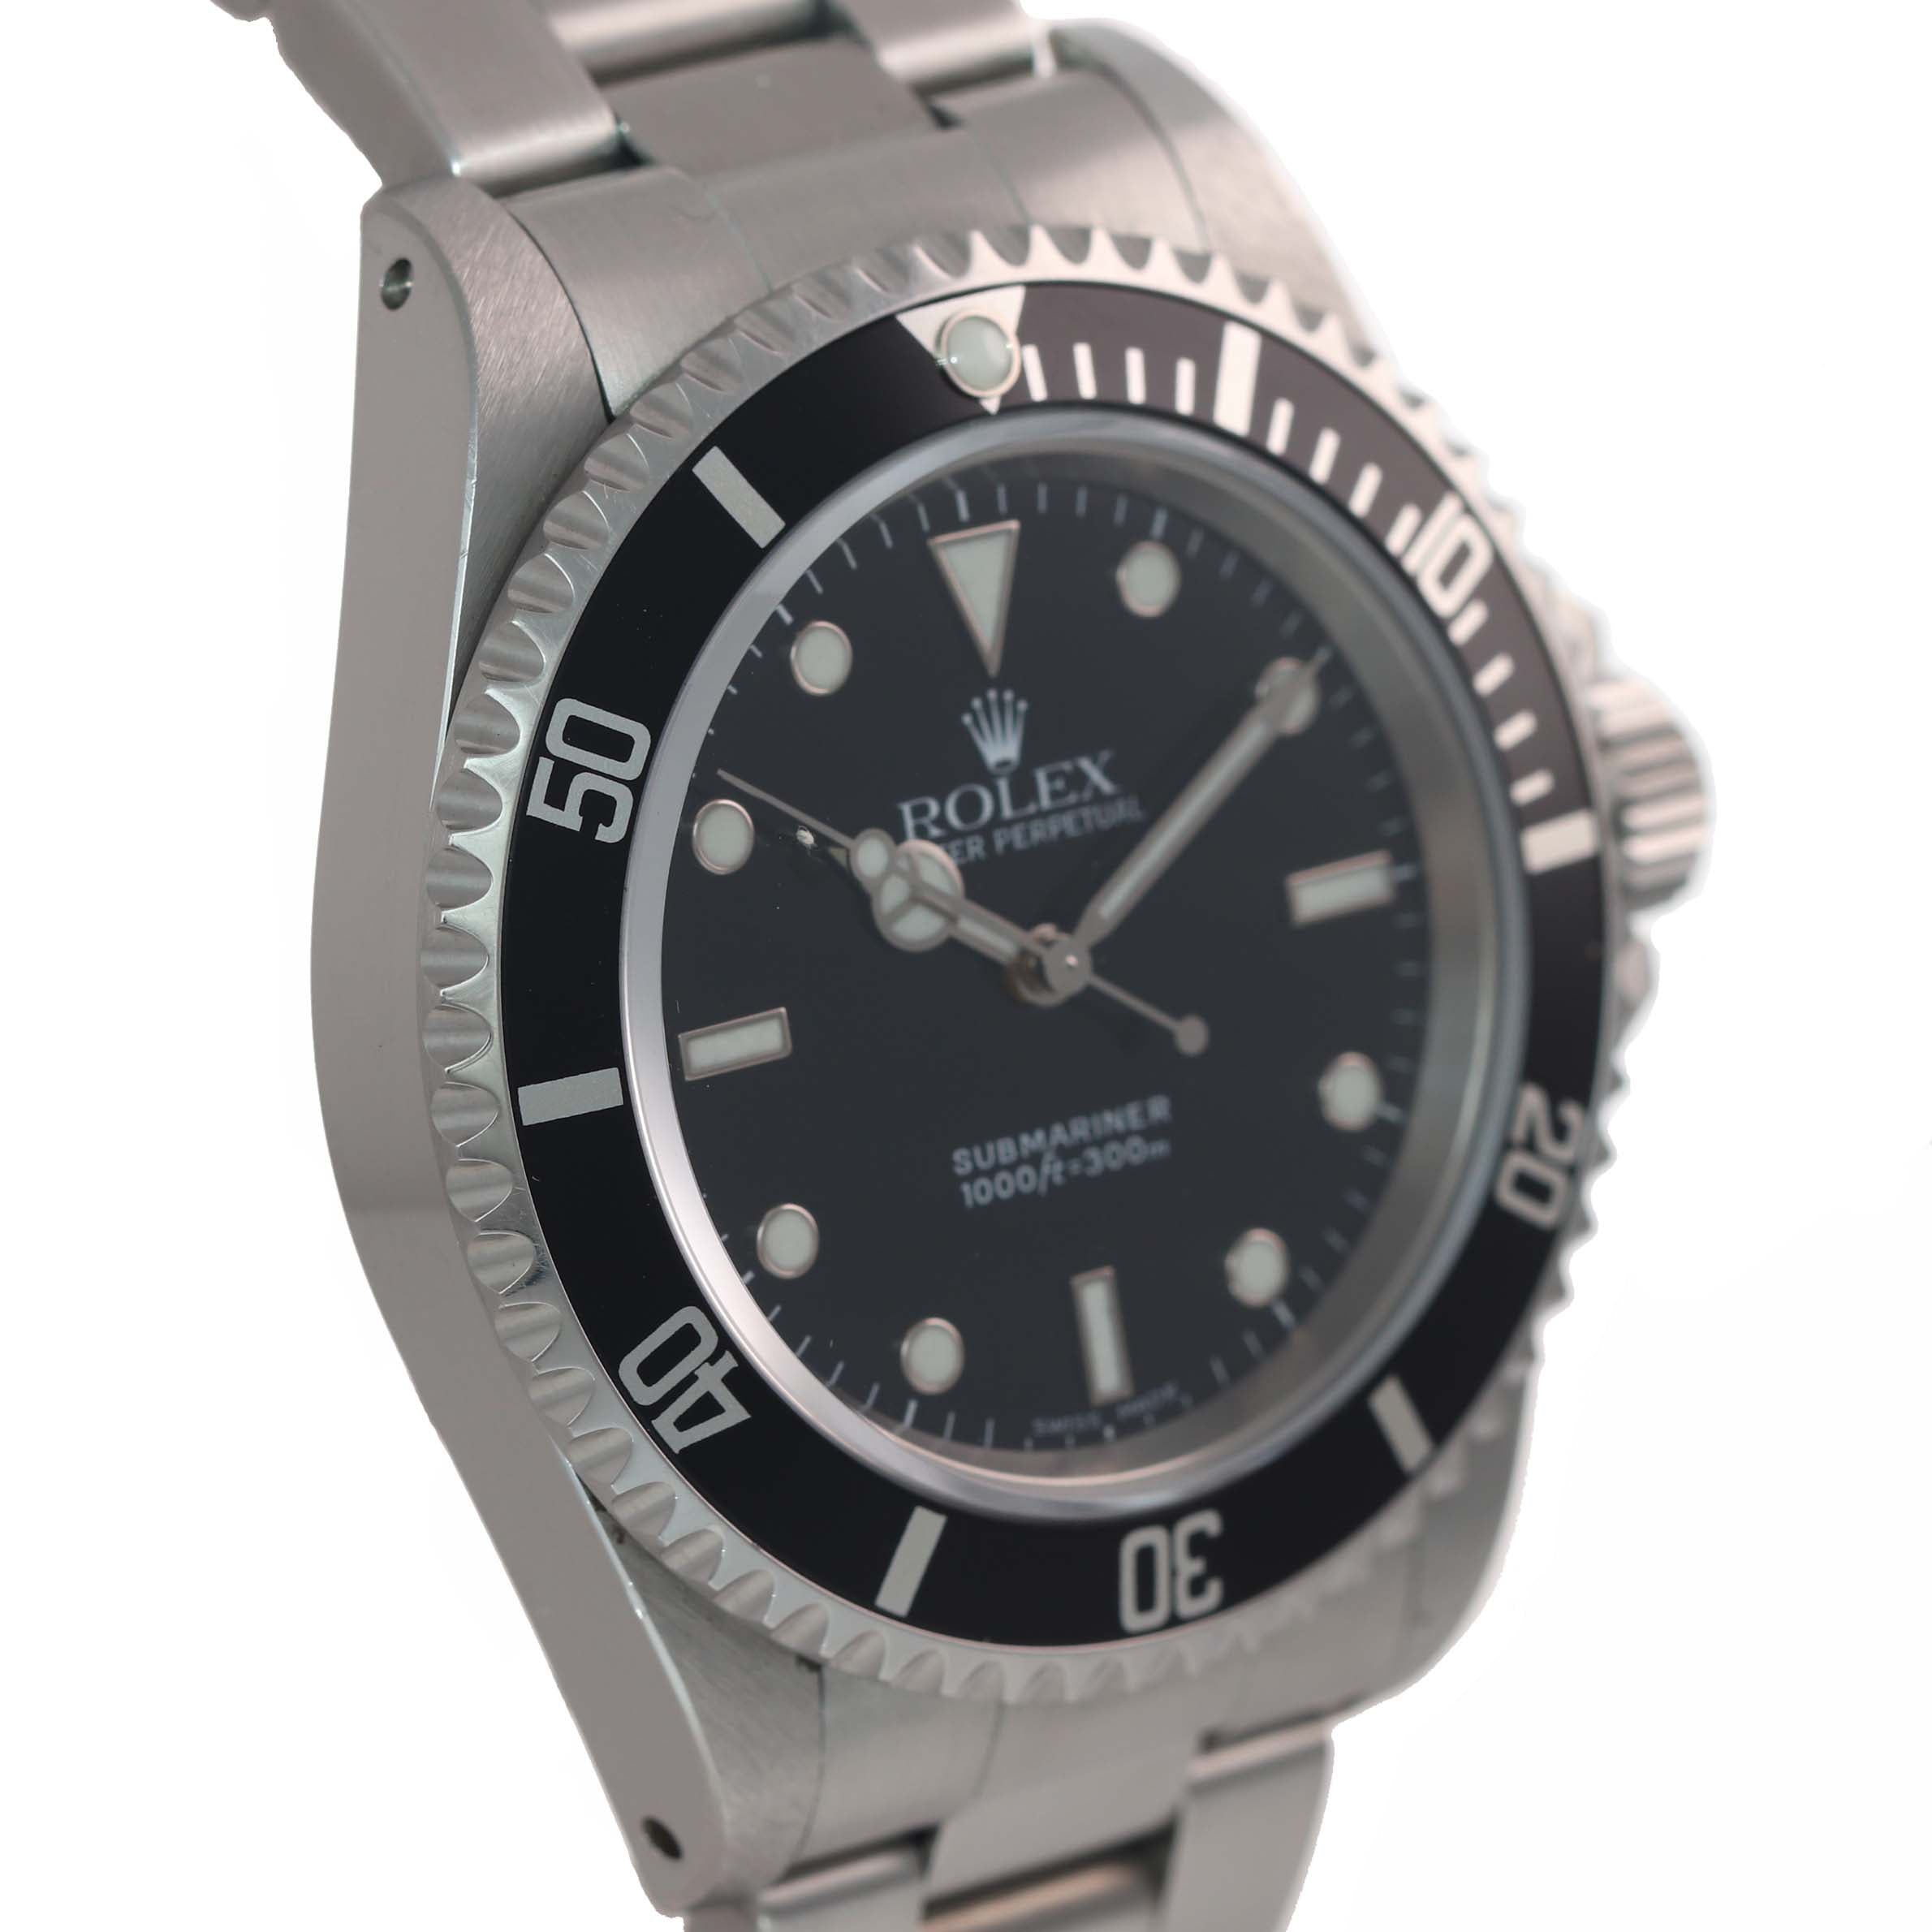 UNPOLISHED 2 LINER PAPERS Rolex Submariner Steel No-Date Black Dial 14060 Watch